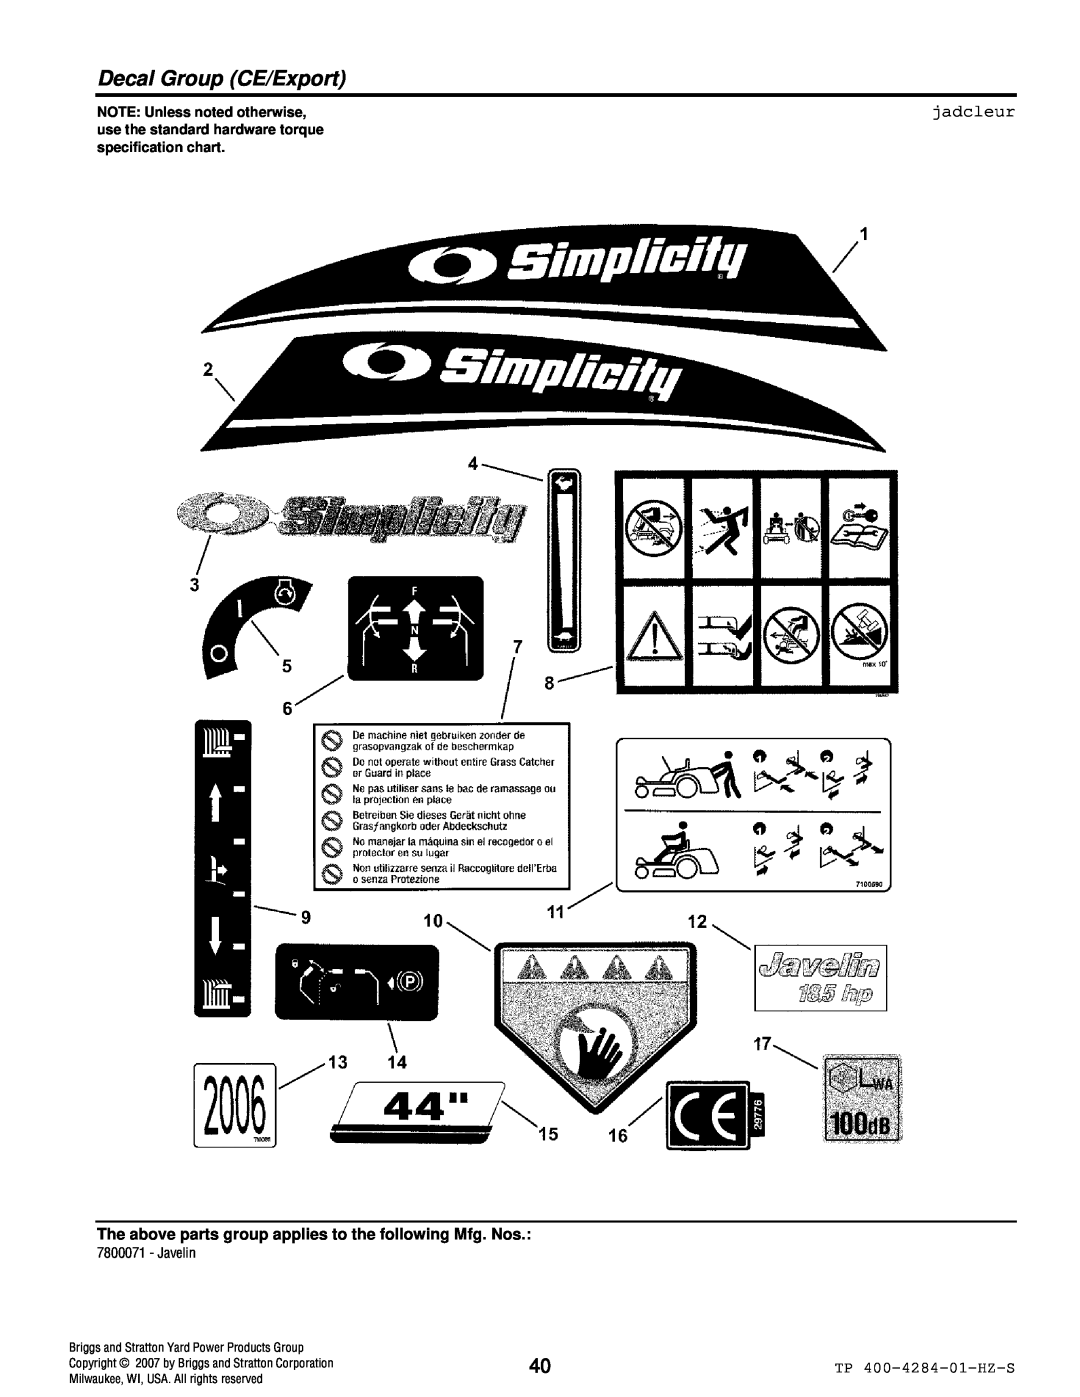 Simplicity TP 400-4284-01-HZ-S manual Decal Group CE/Export, jadcleur, NOTE: Unless noted otherwise, specification chart 